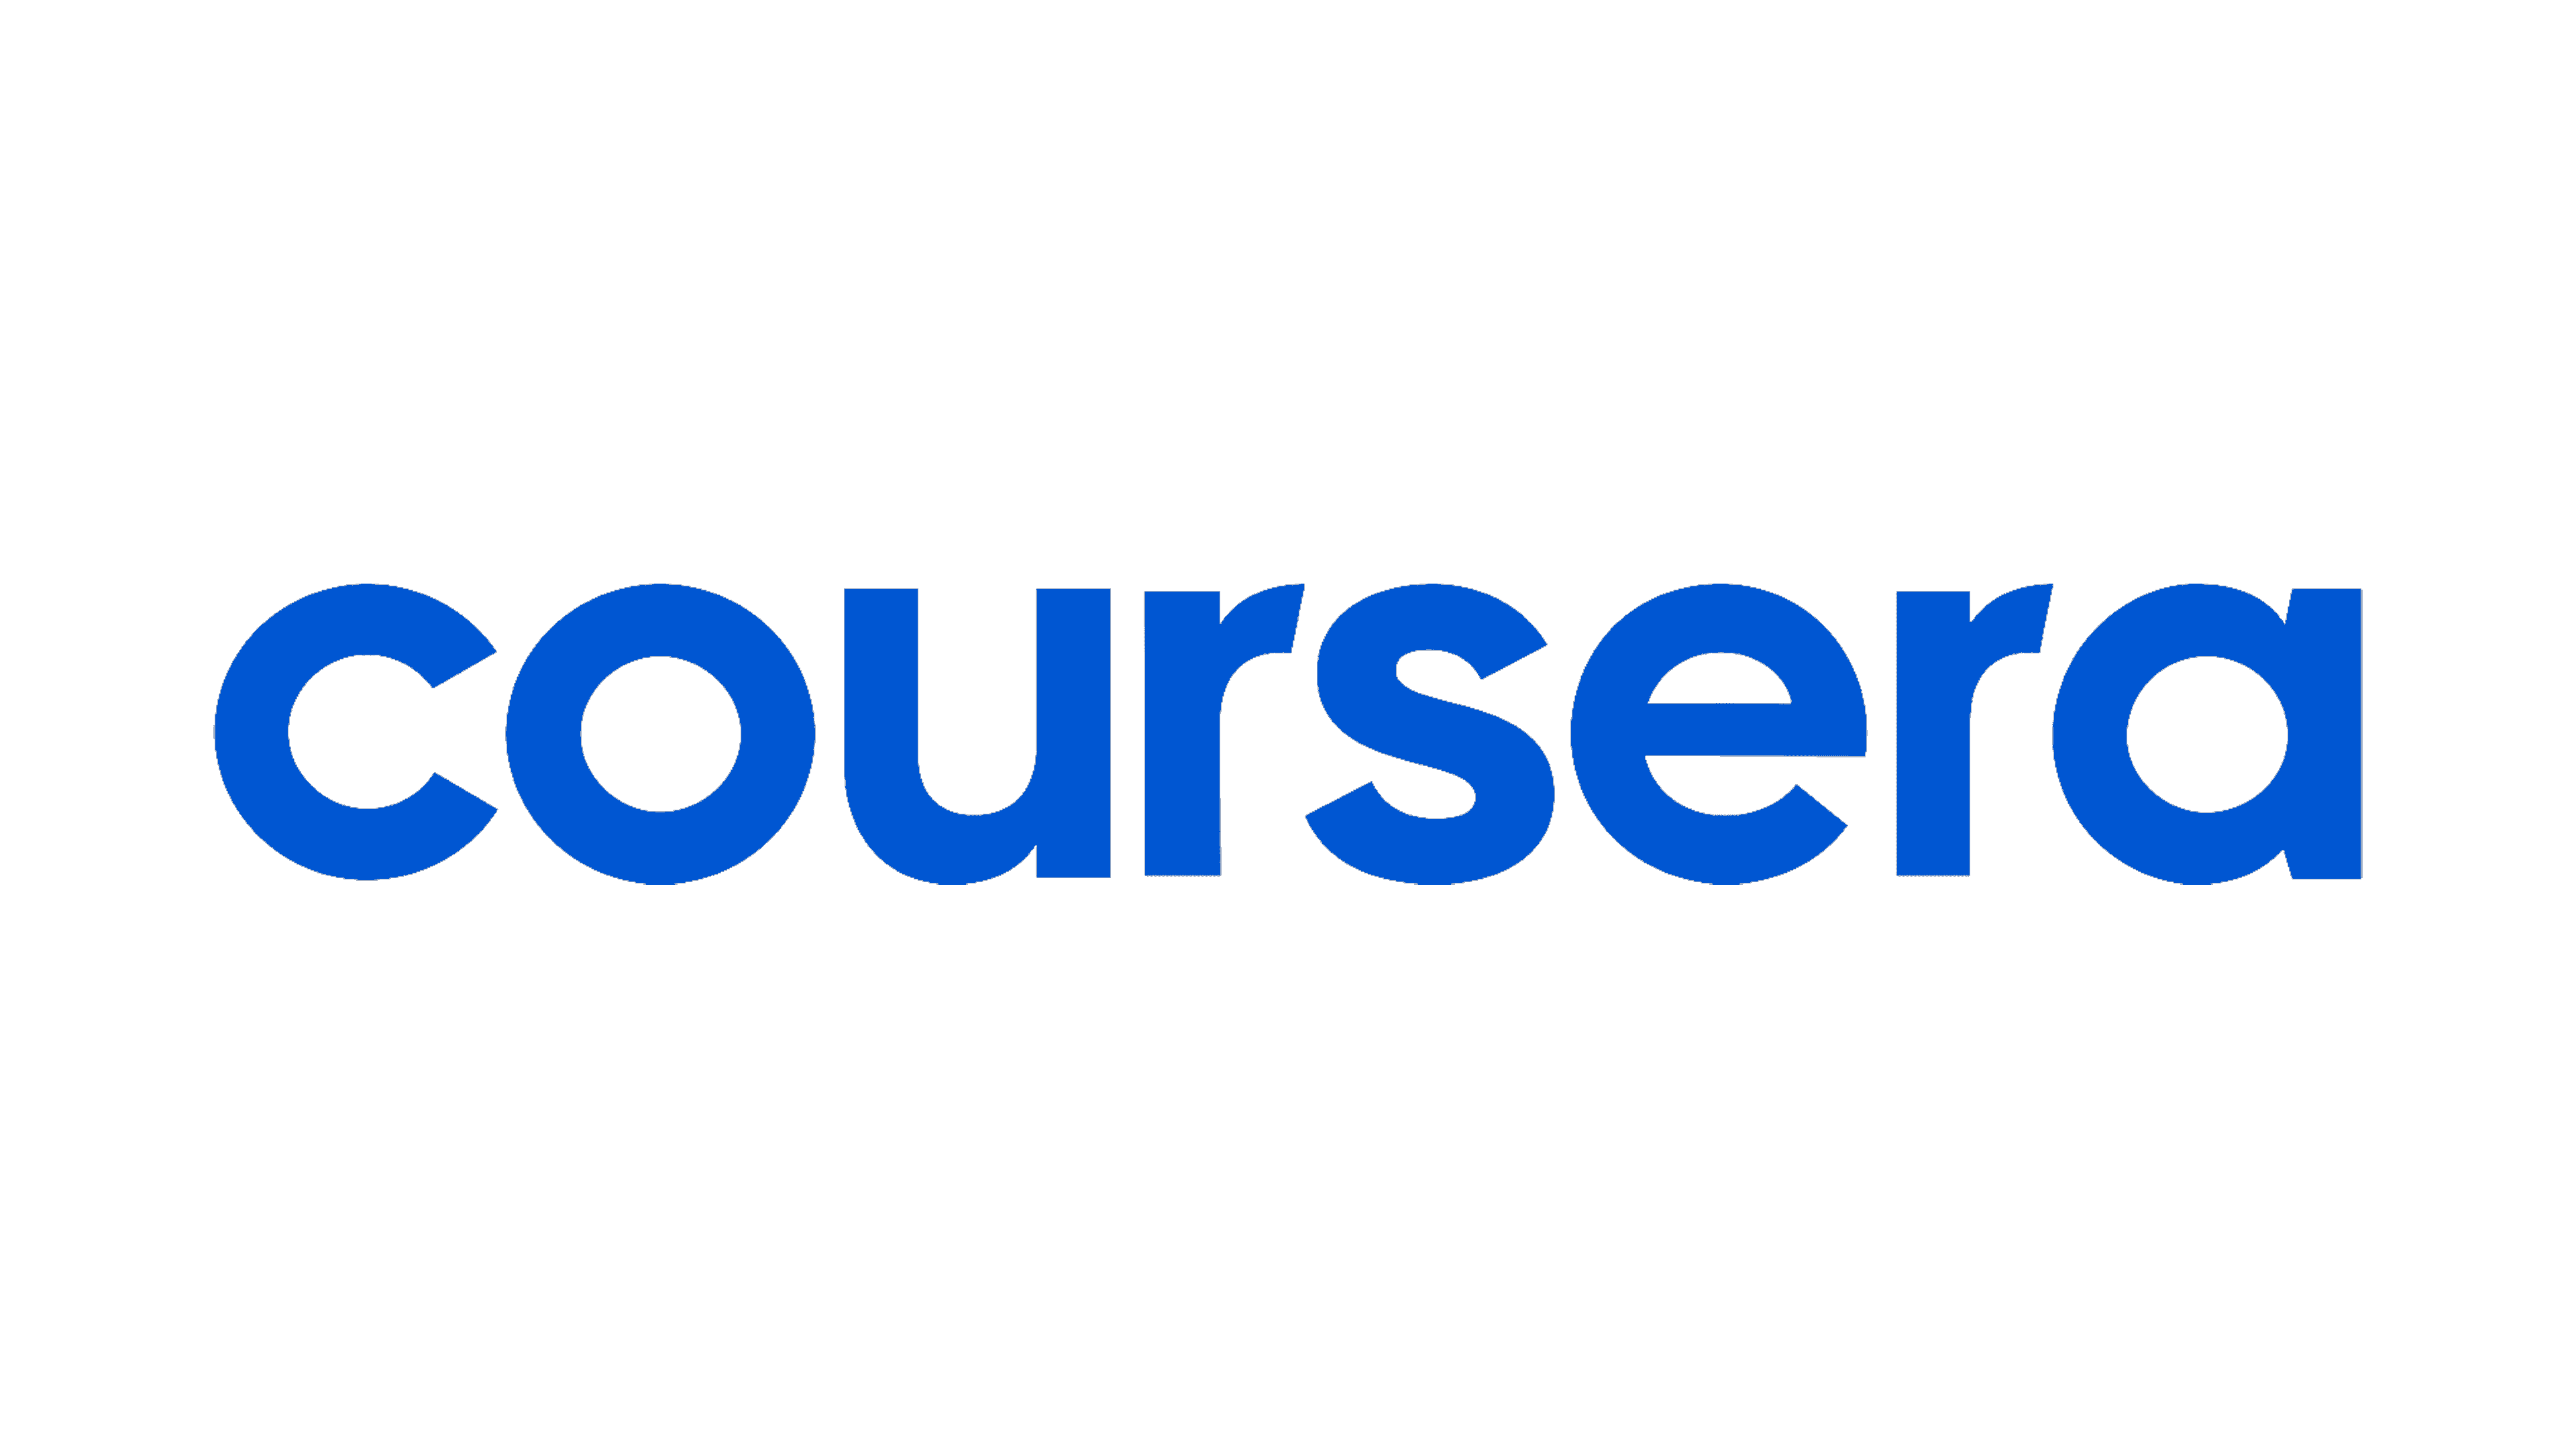 How to learn Coursera courses for free